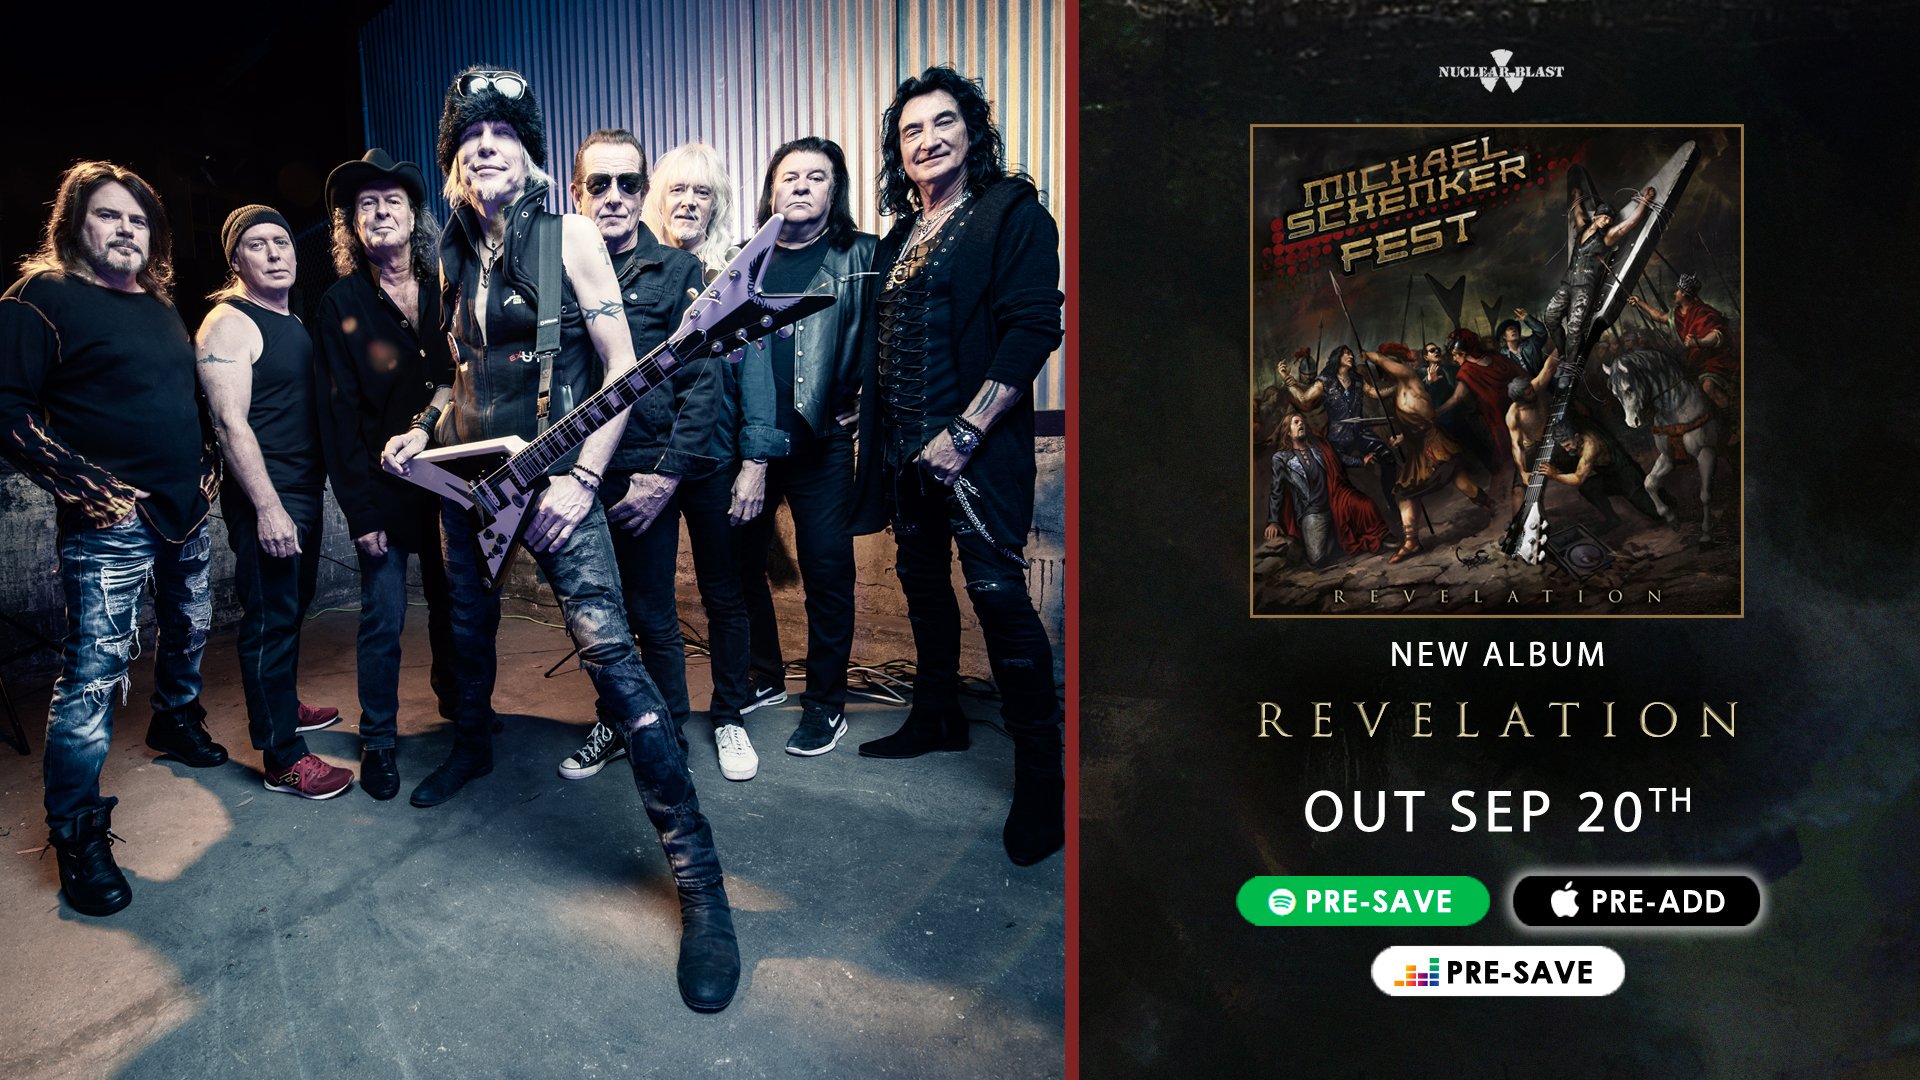 Michael Schenker on "On September 20th, guitar legend Michael Schenker will release his second Michael Schenker Fest album „Revelation“ Pre-save it now on Spotify, Apple or and the